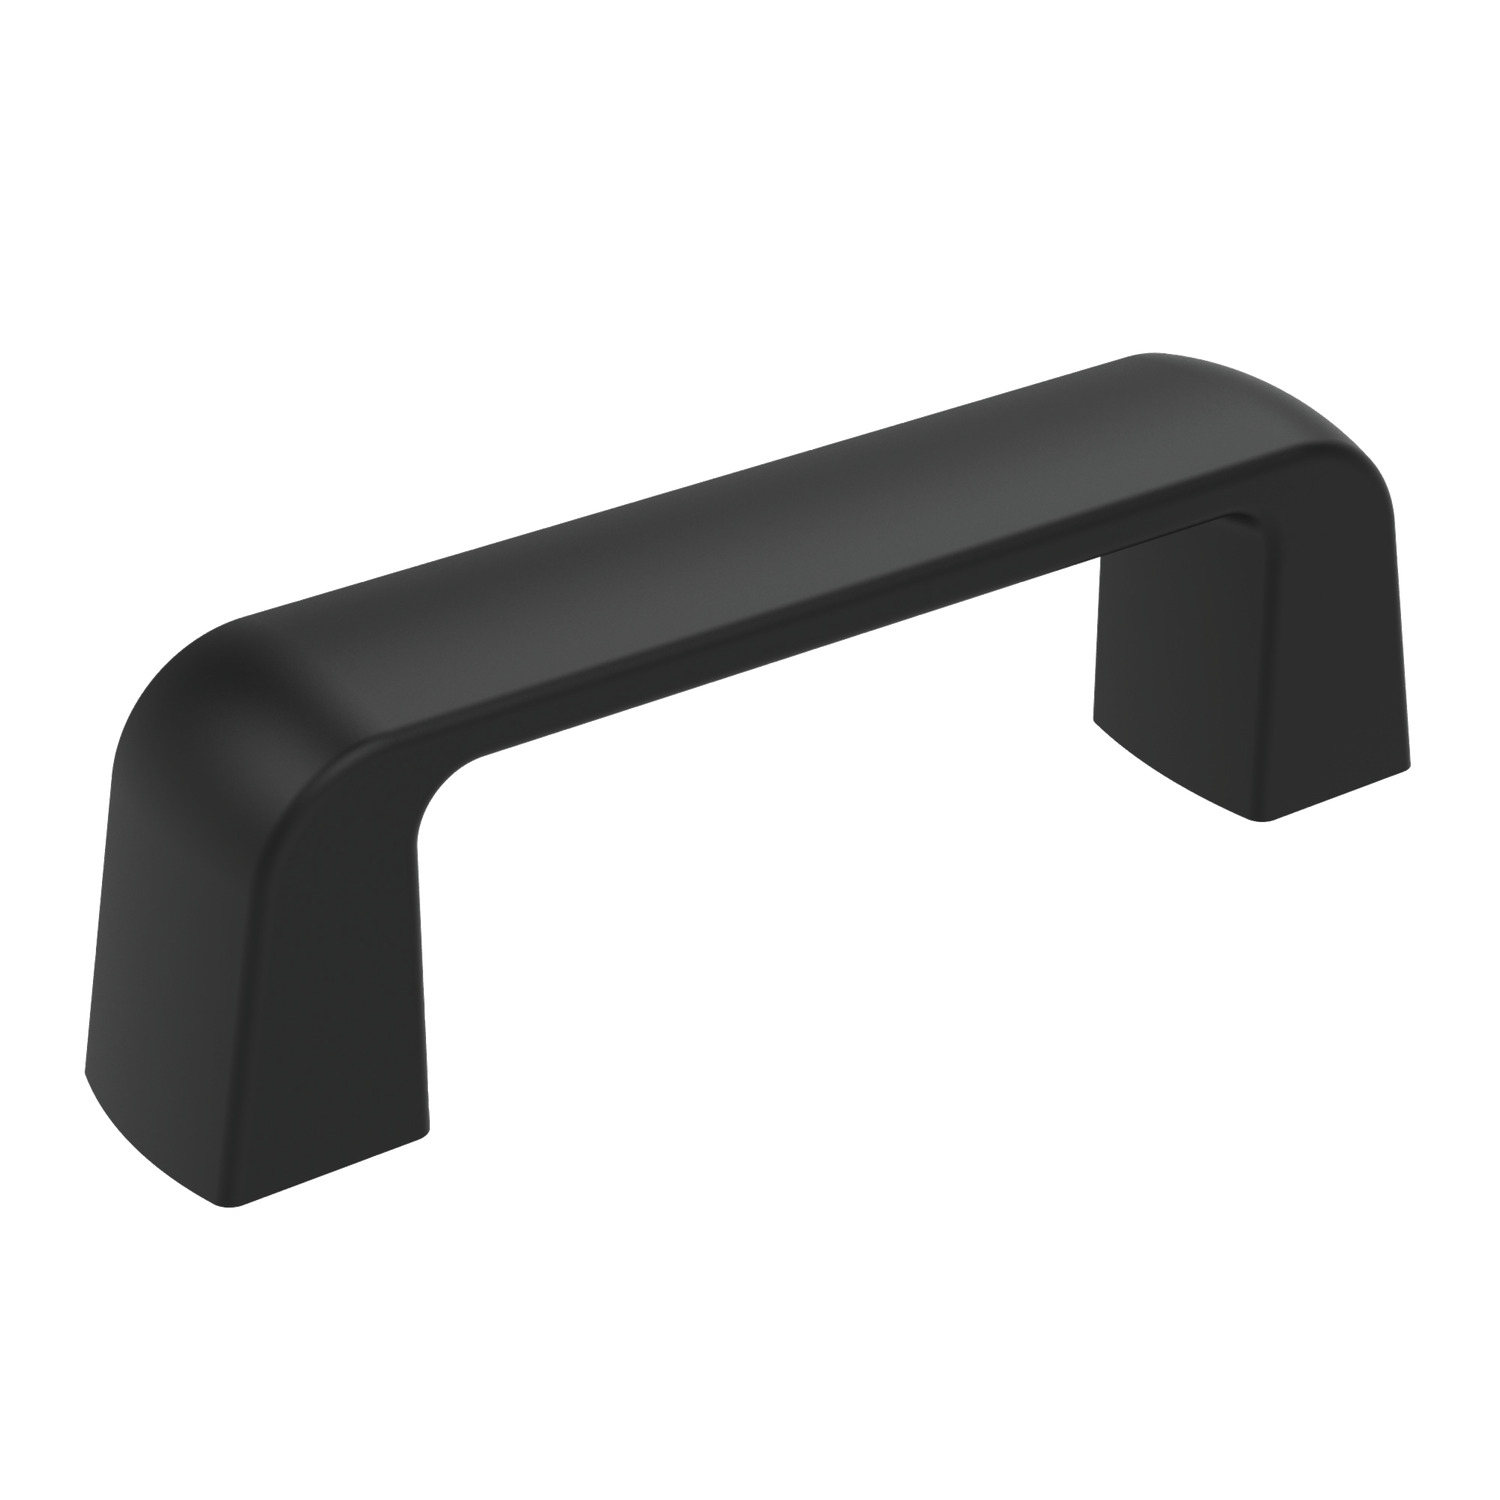 Plastic Pull Handles This rear mounting pull handle is black matte with a glass fibre reinforced. Other colours available on request - subject to minimum order quantity.